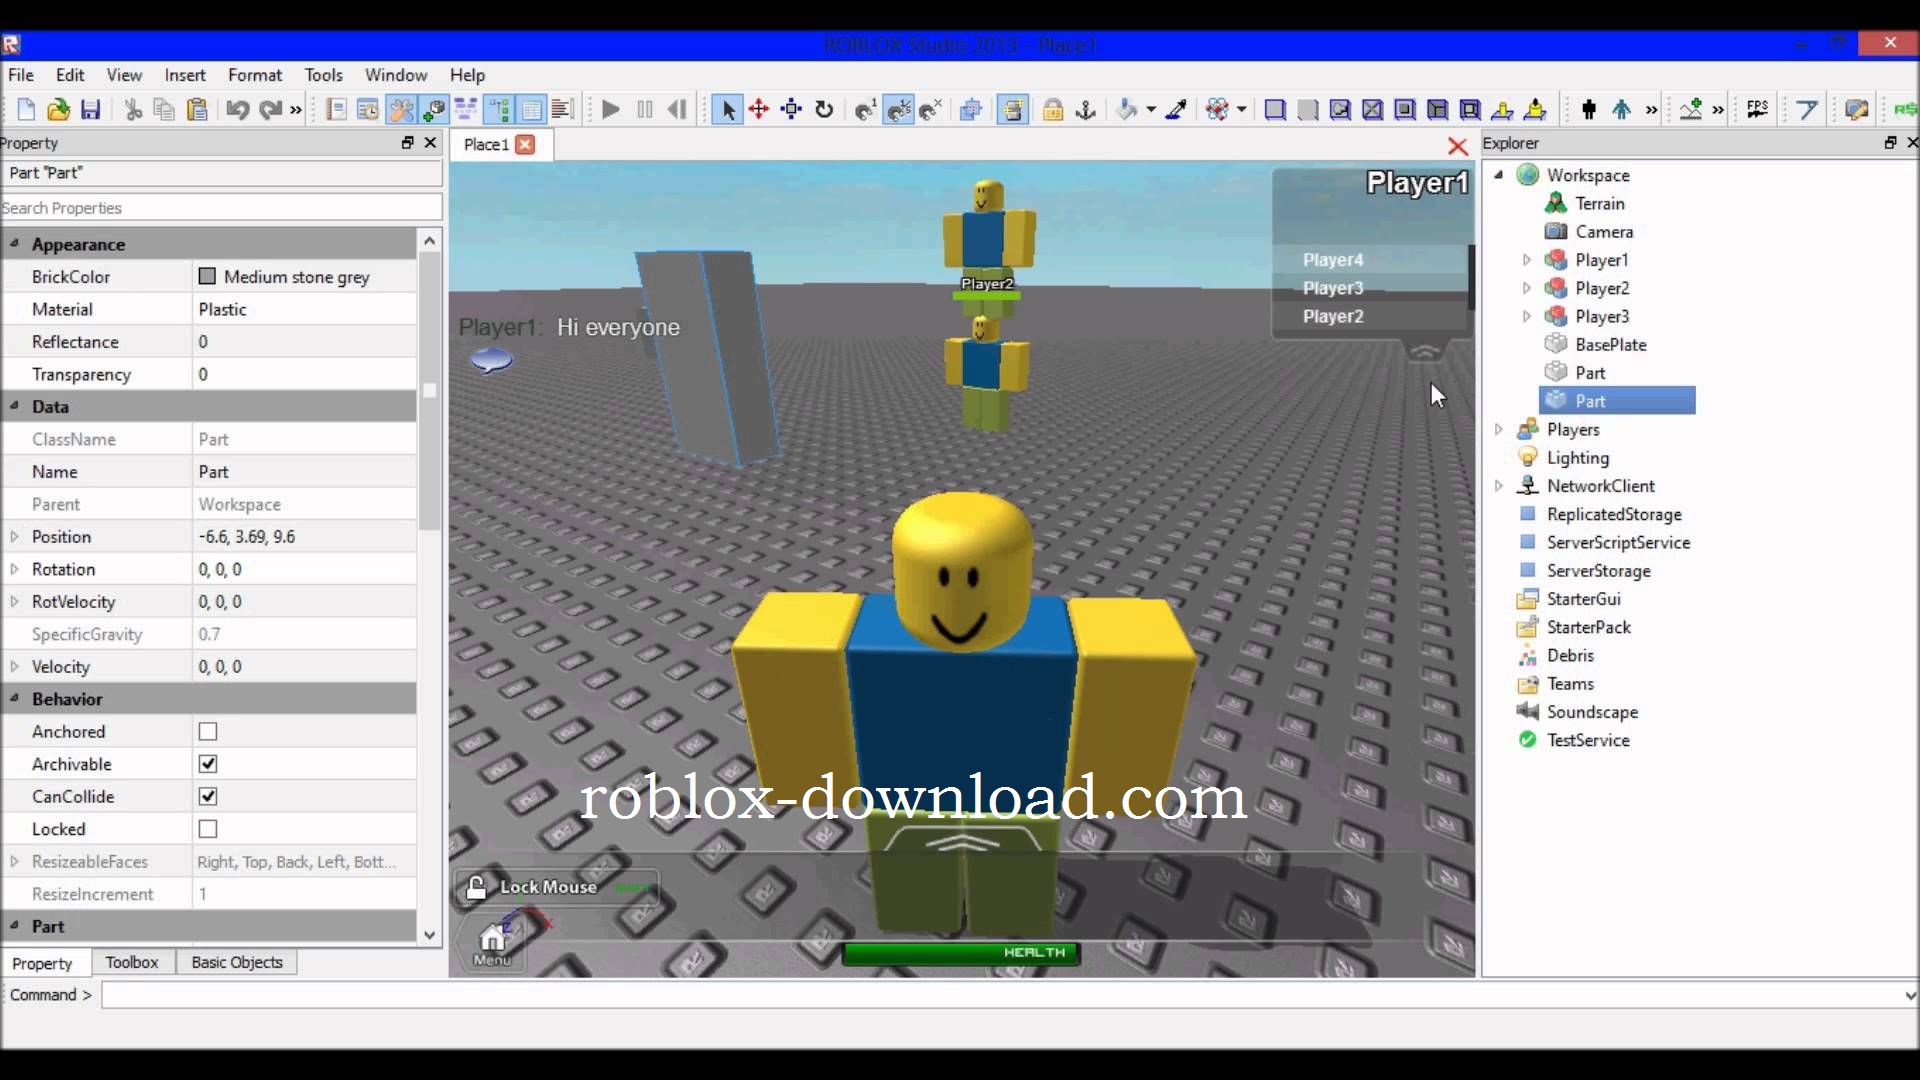 406 Roblox Icon Images At Vectorified Com - cancollide roblox wikia fandom powered by wikia